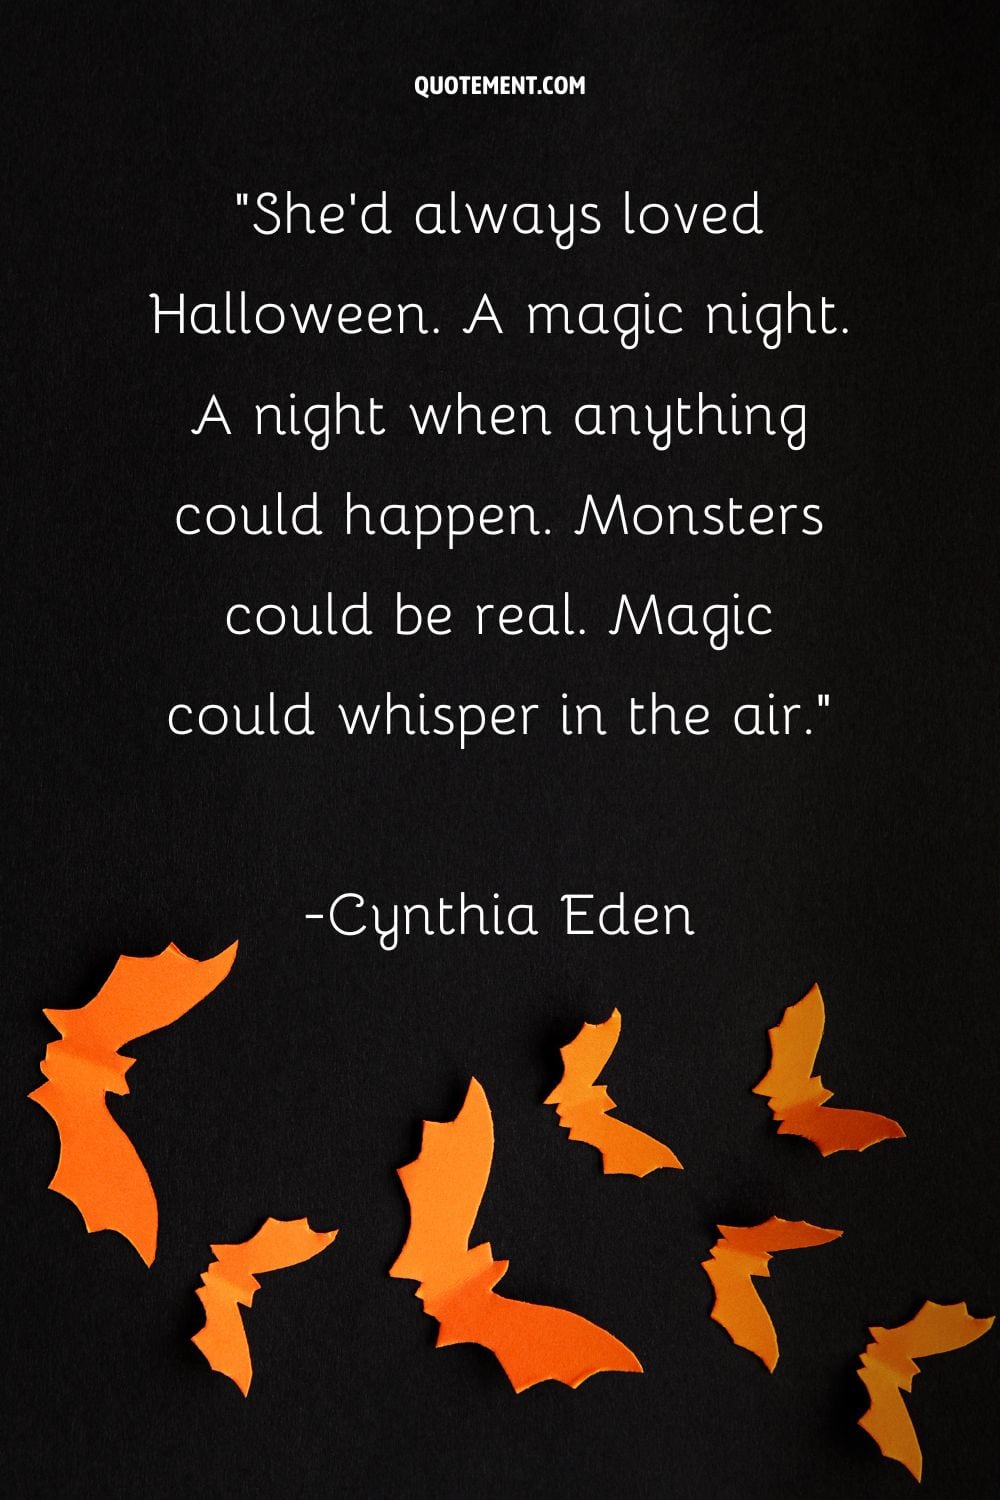 She'd always loved Halloween. A magic night